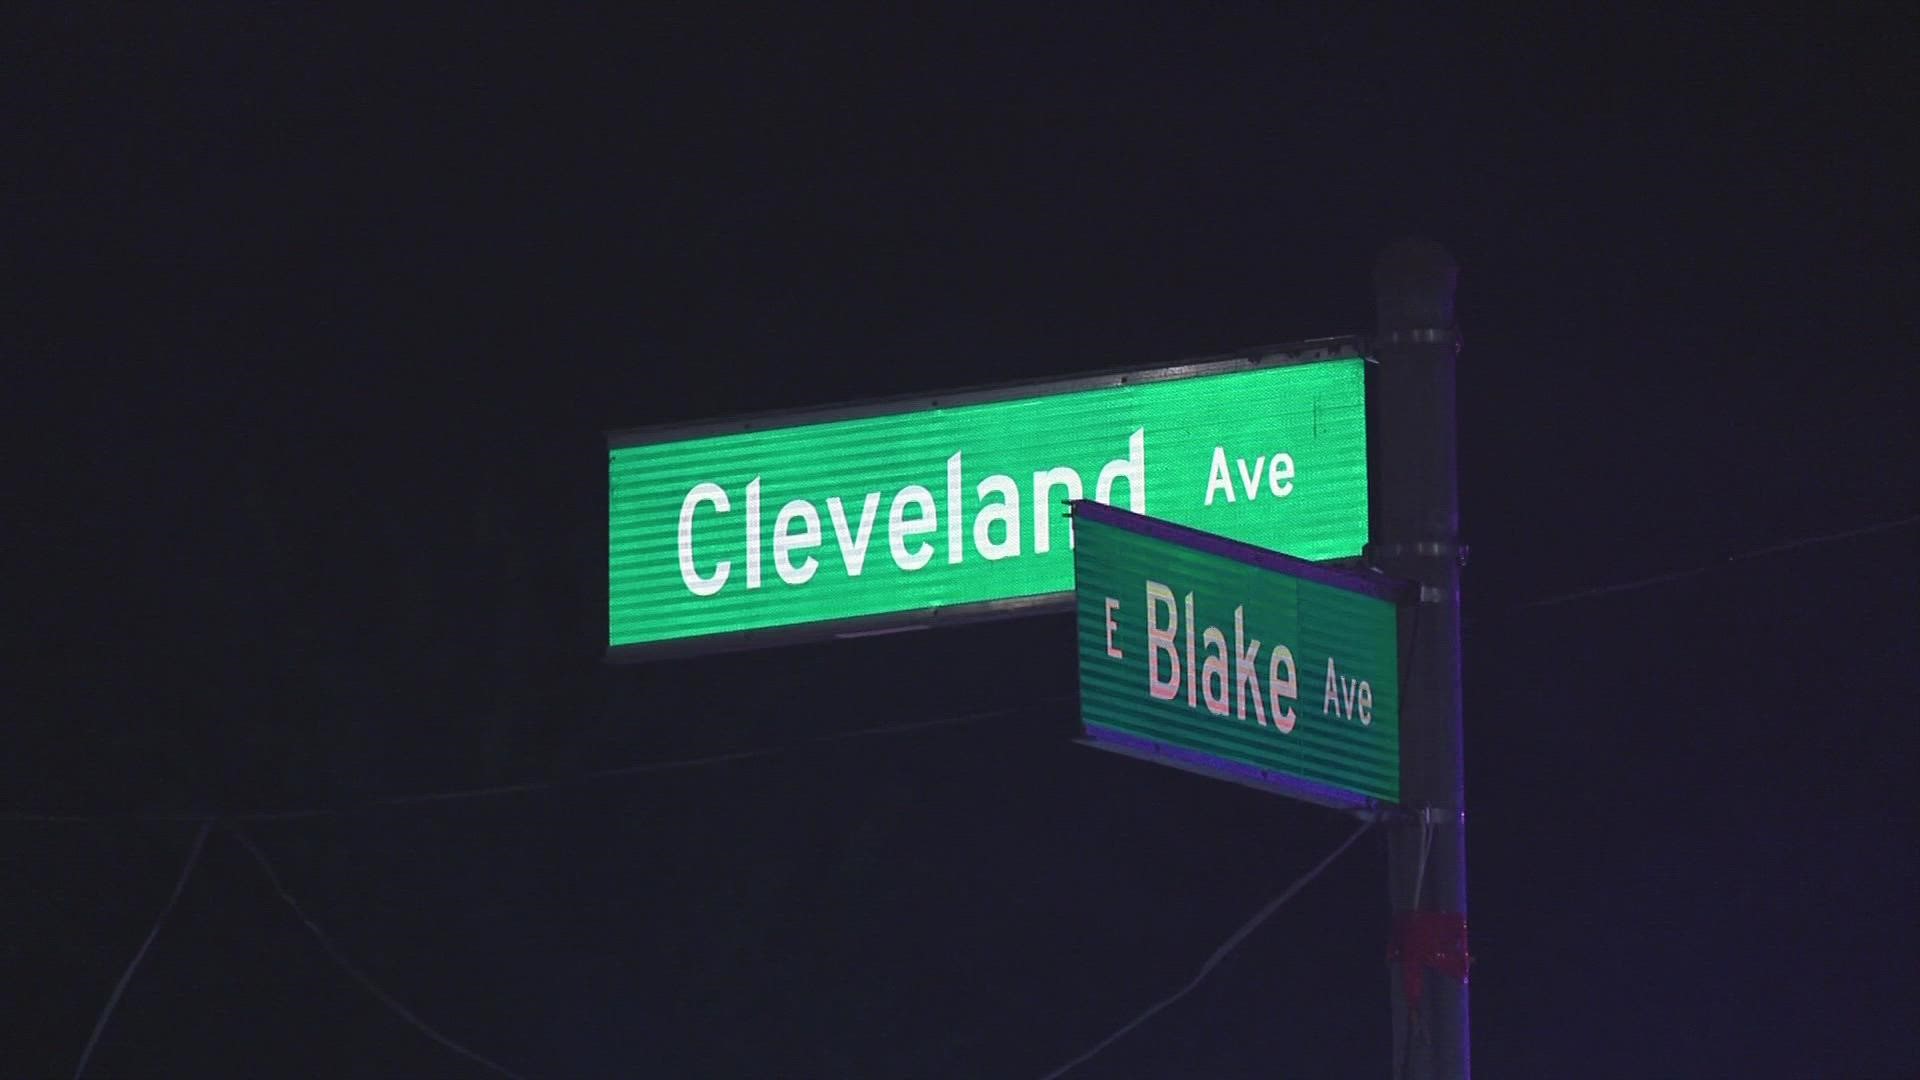 The shooting happened around 1:40 a.m. in the 2100 block of Cleveland Avenue.